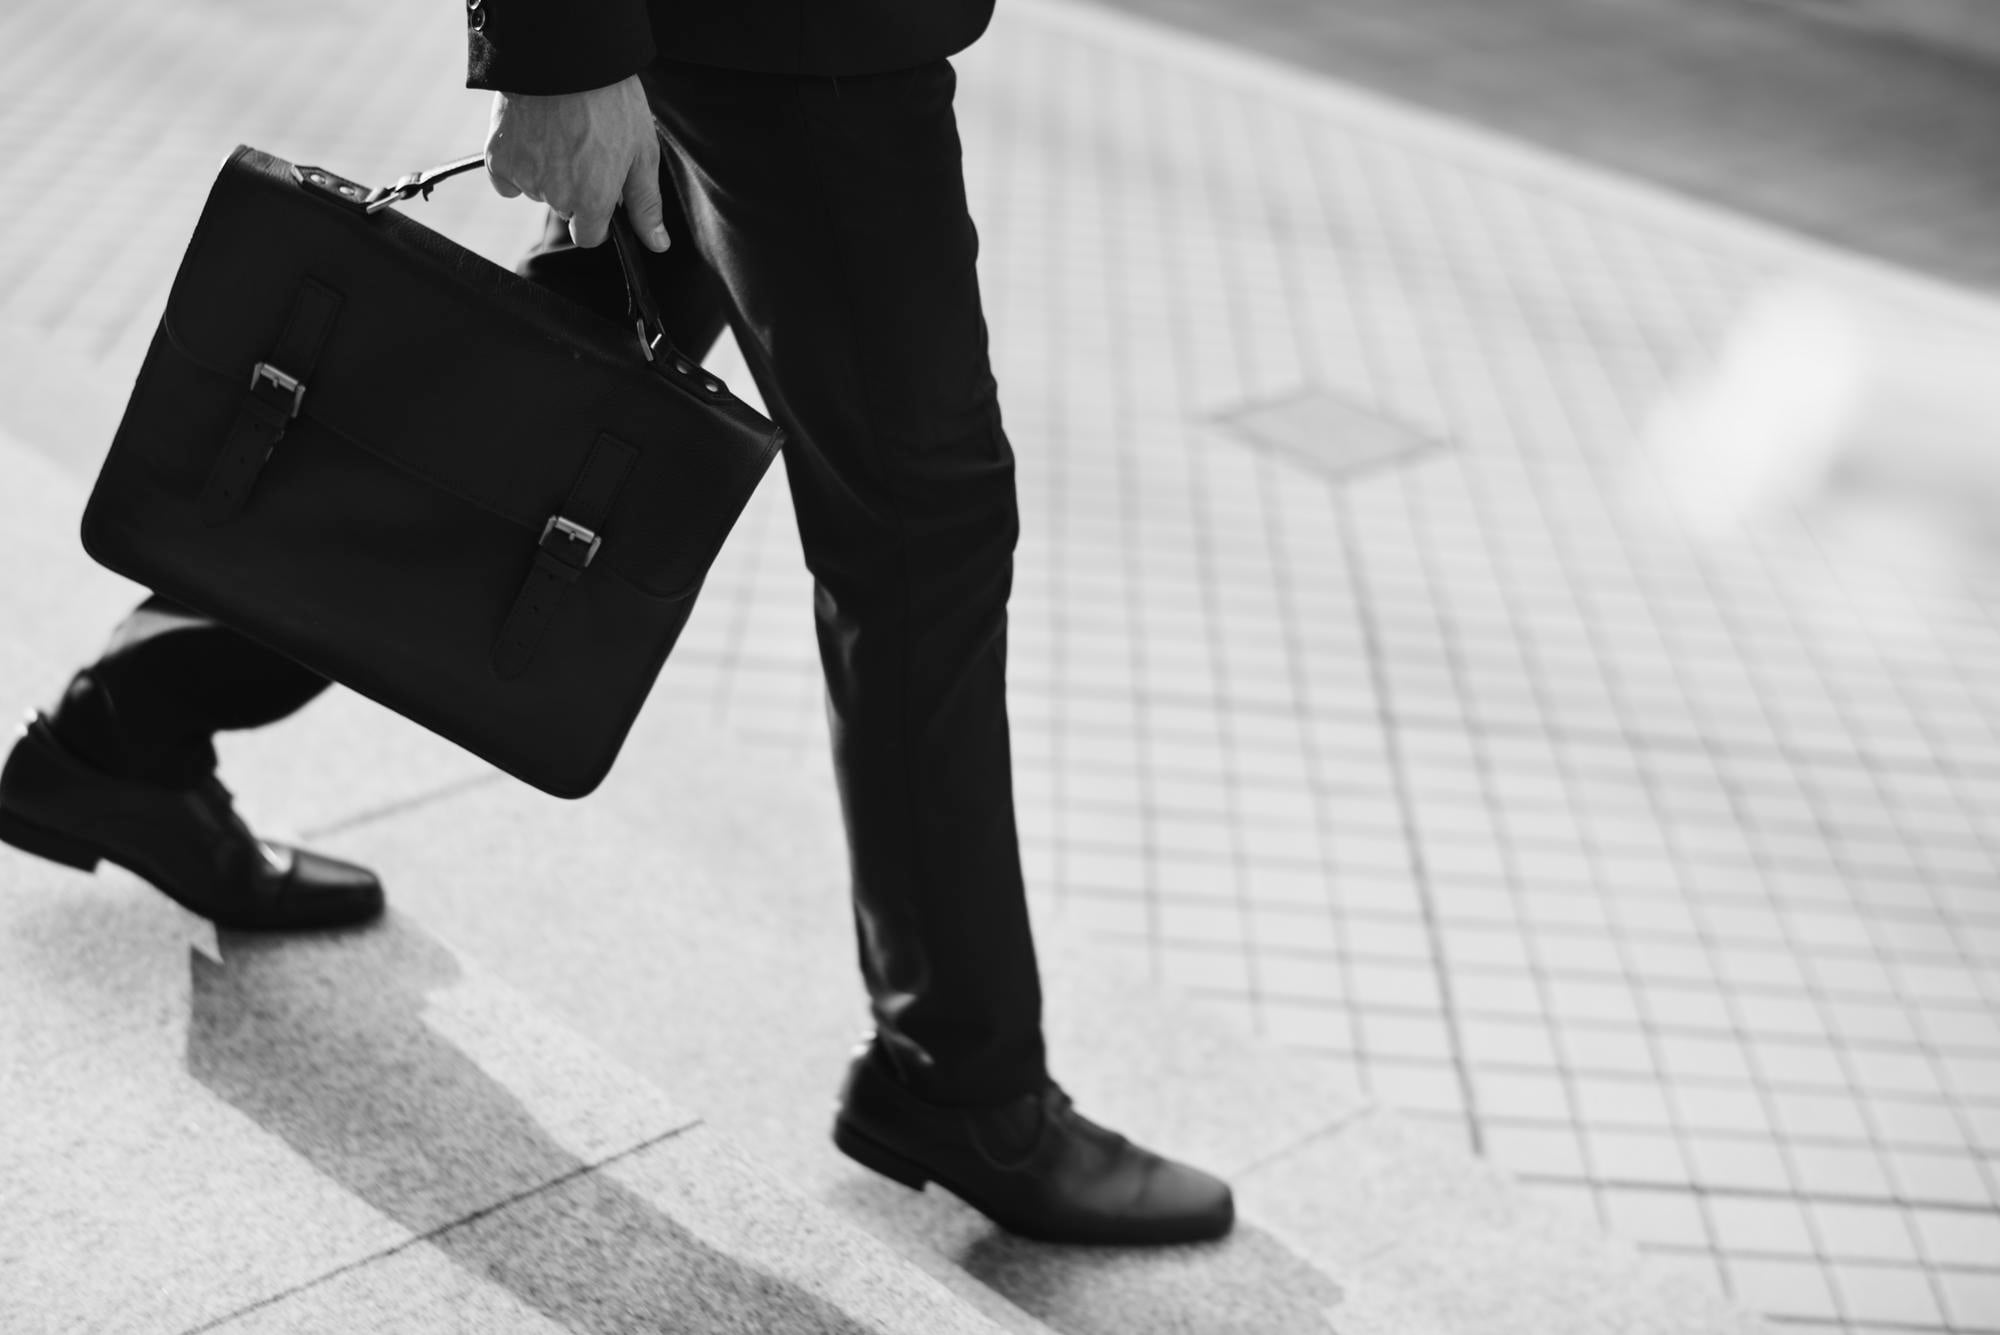 Business Man in Suit with a Bag Going to a Meeting